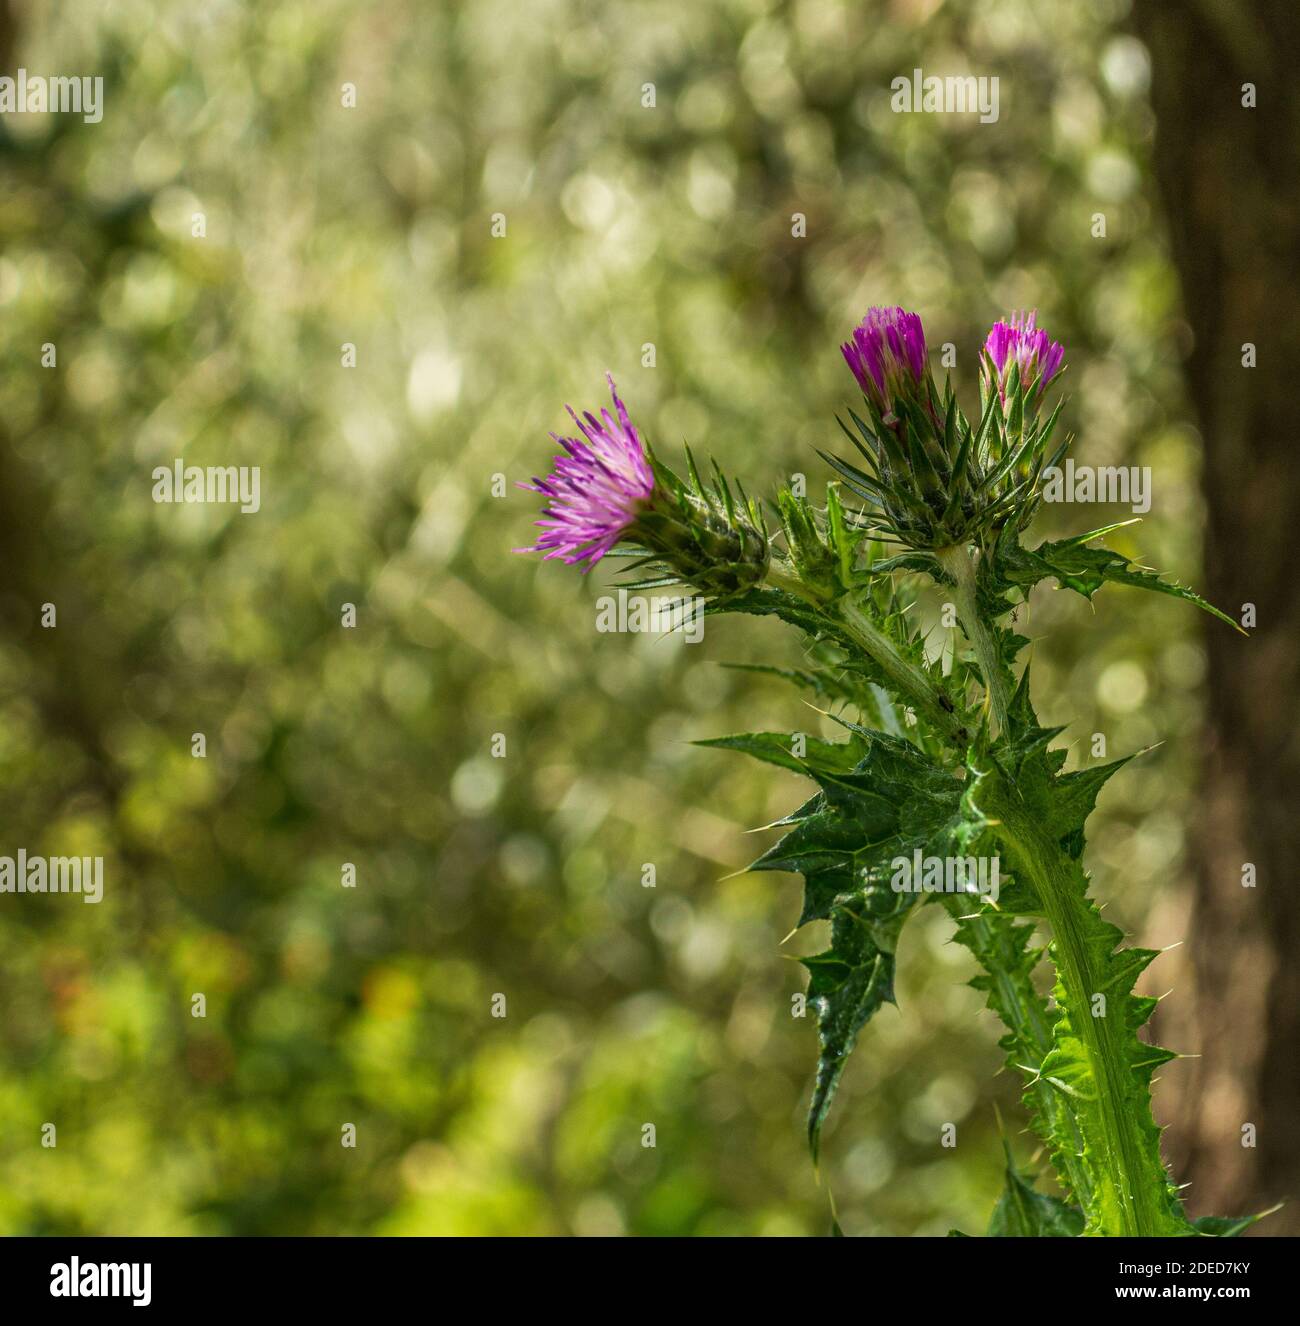 Carduus pycnocephalus, Woolly thistle Plant in Flower Stock Photo